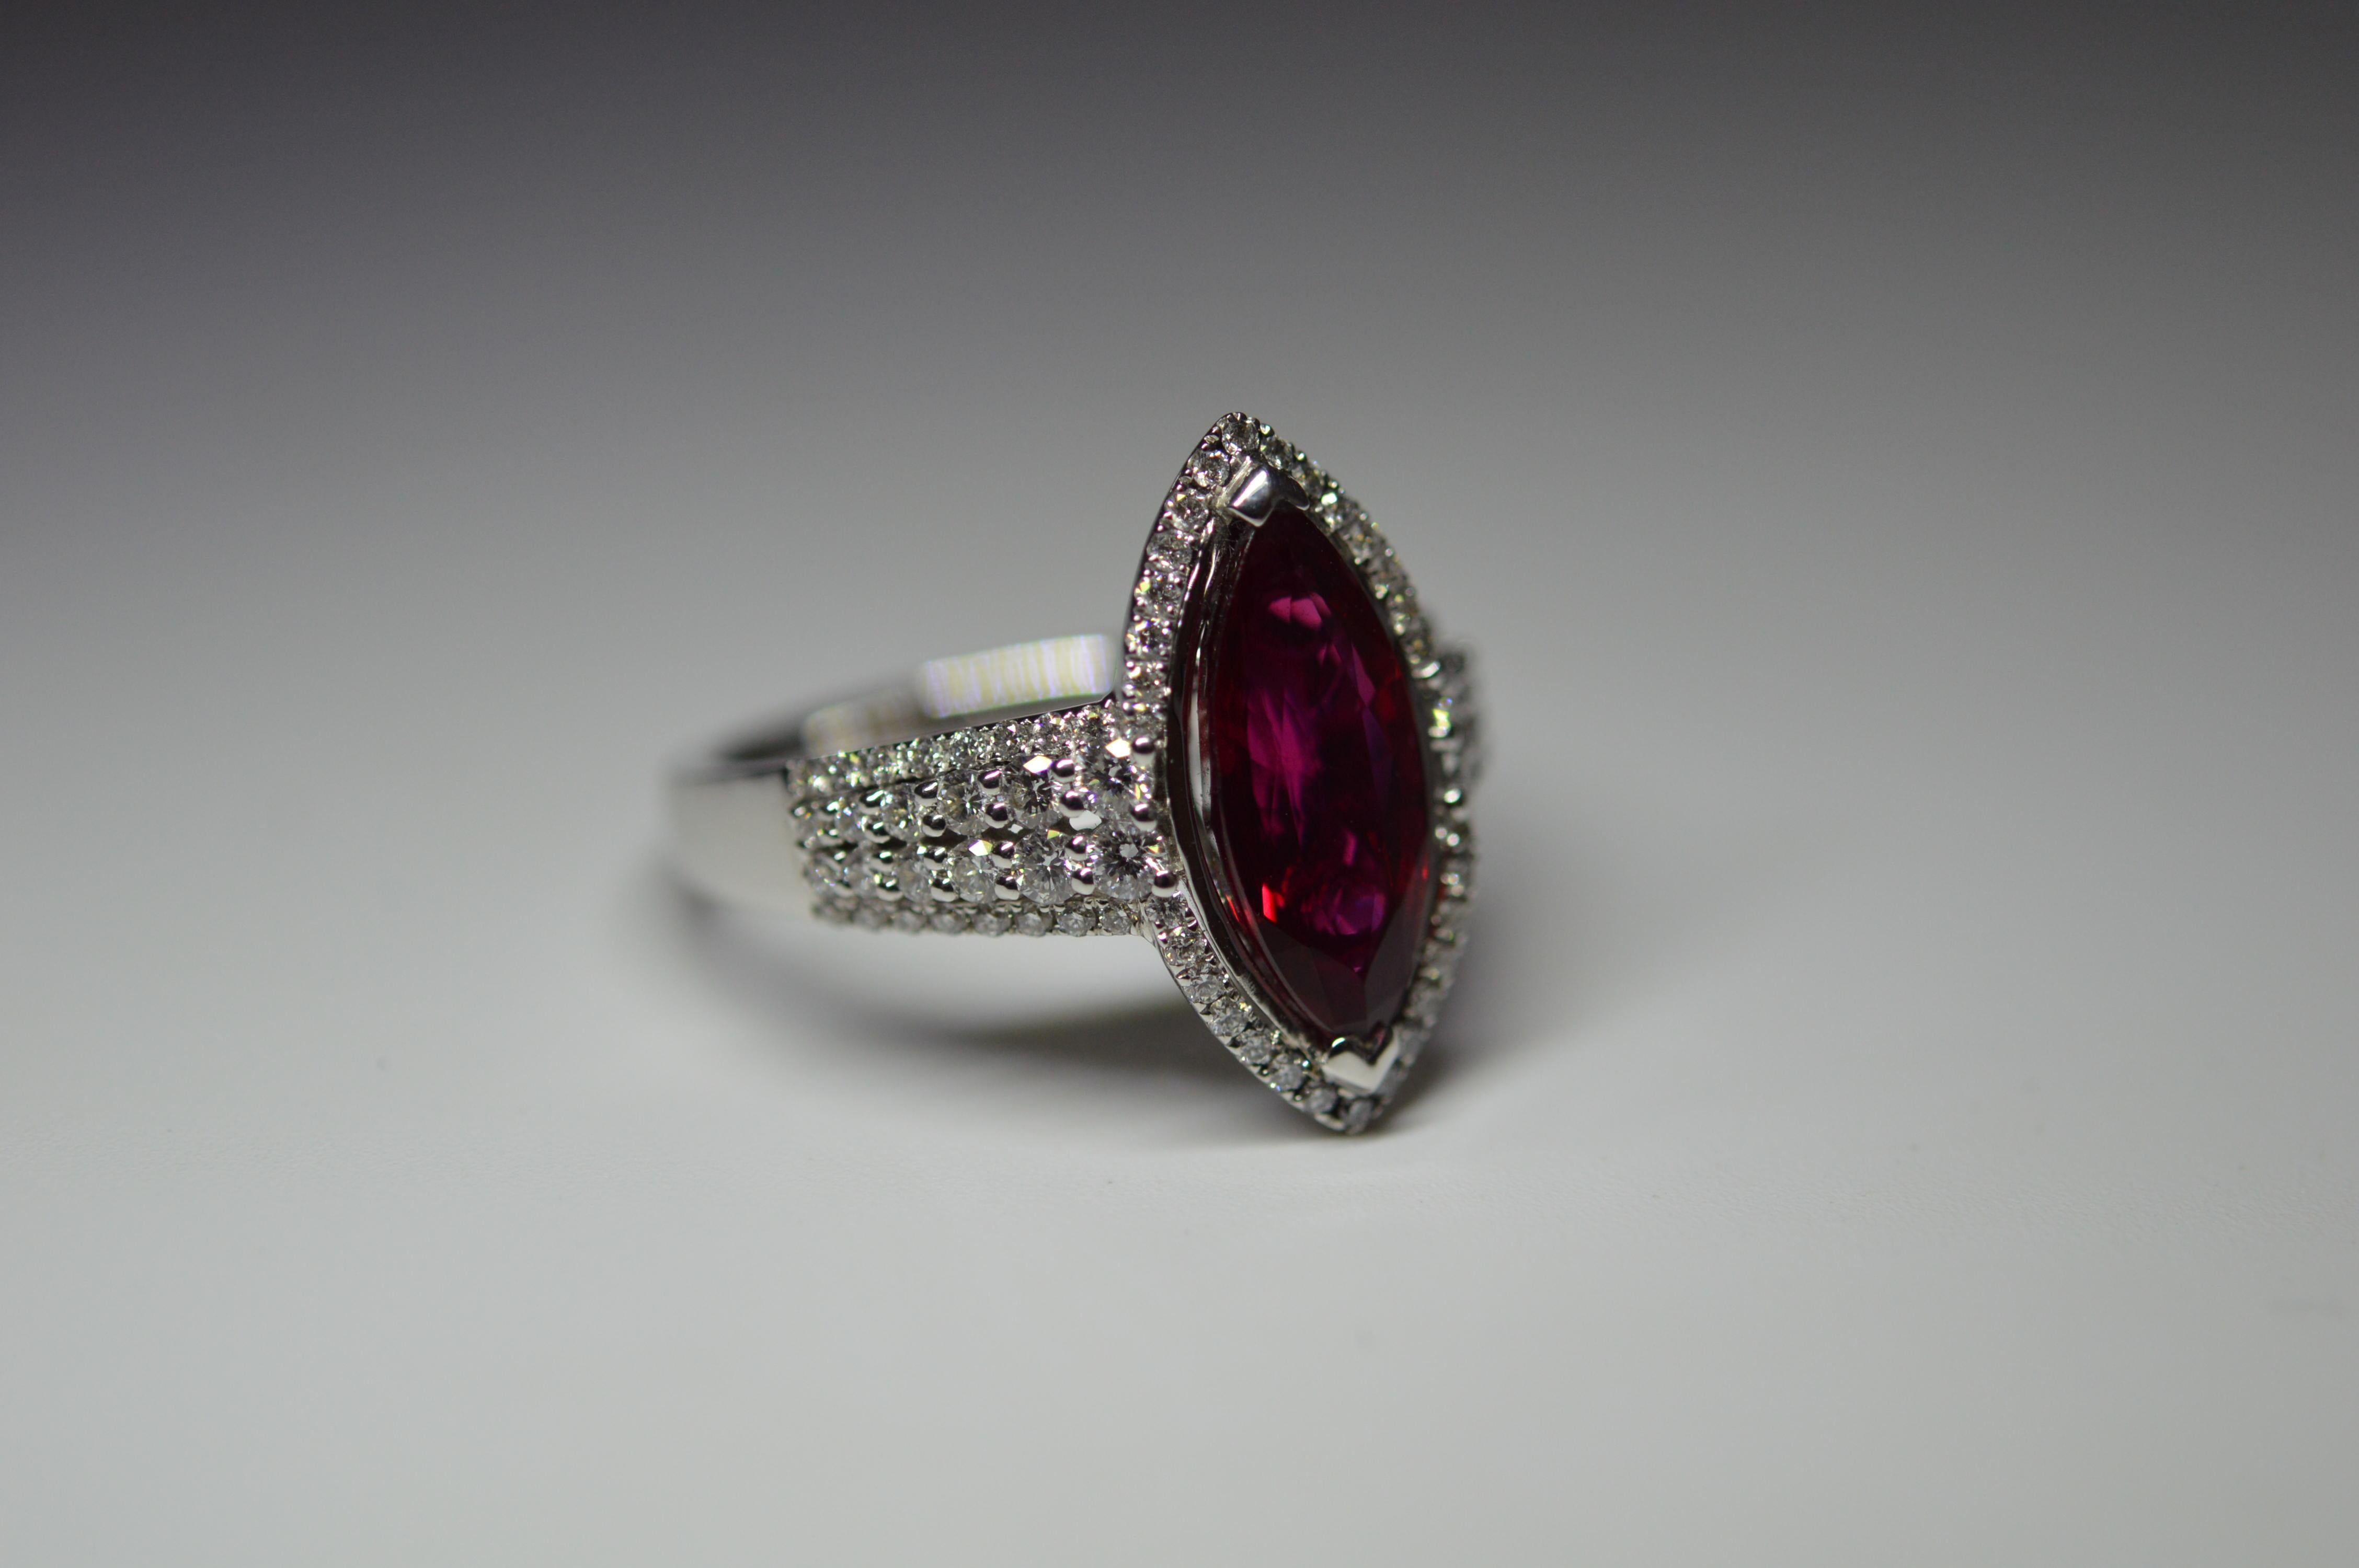 Siam Marquise Ruby Ring 2.95 Cts Heated C.Dunaigre Certified Unworn For Sale 6